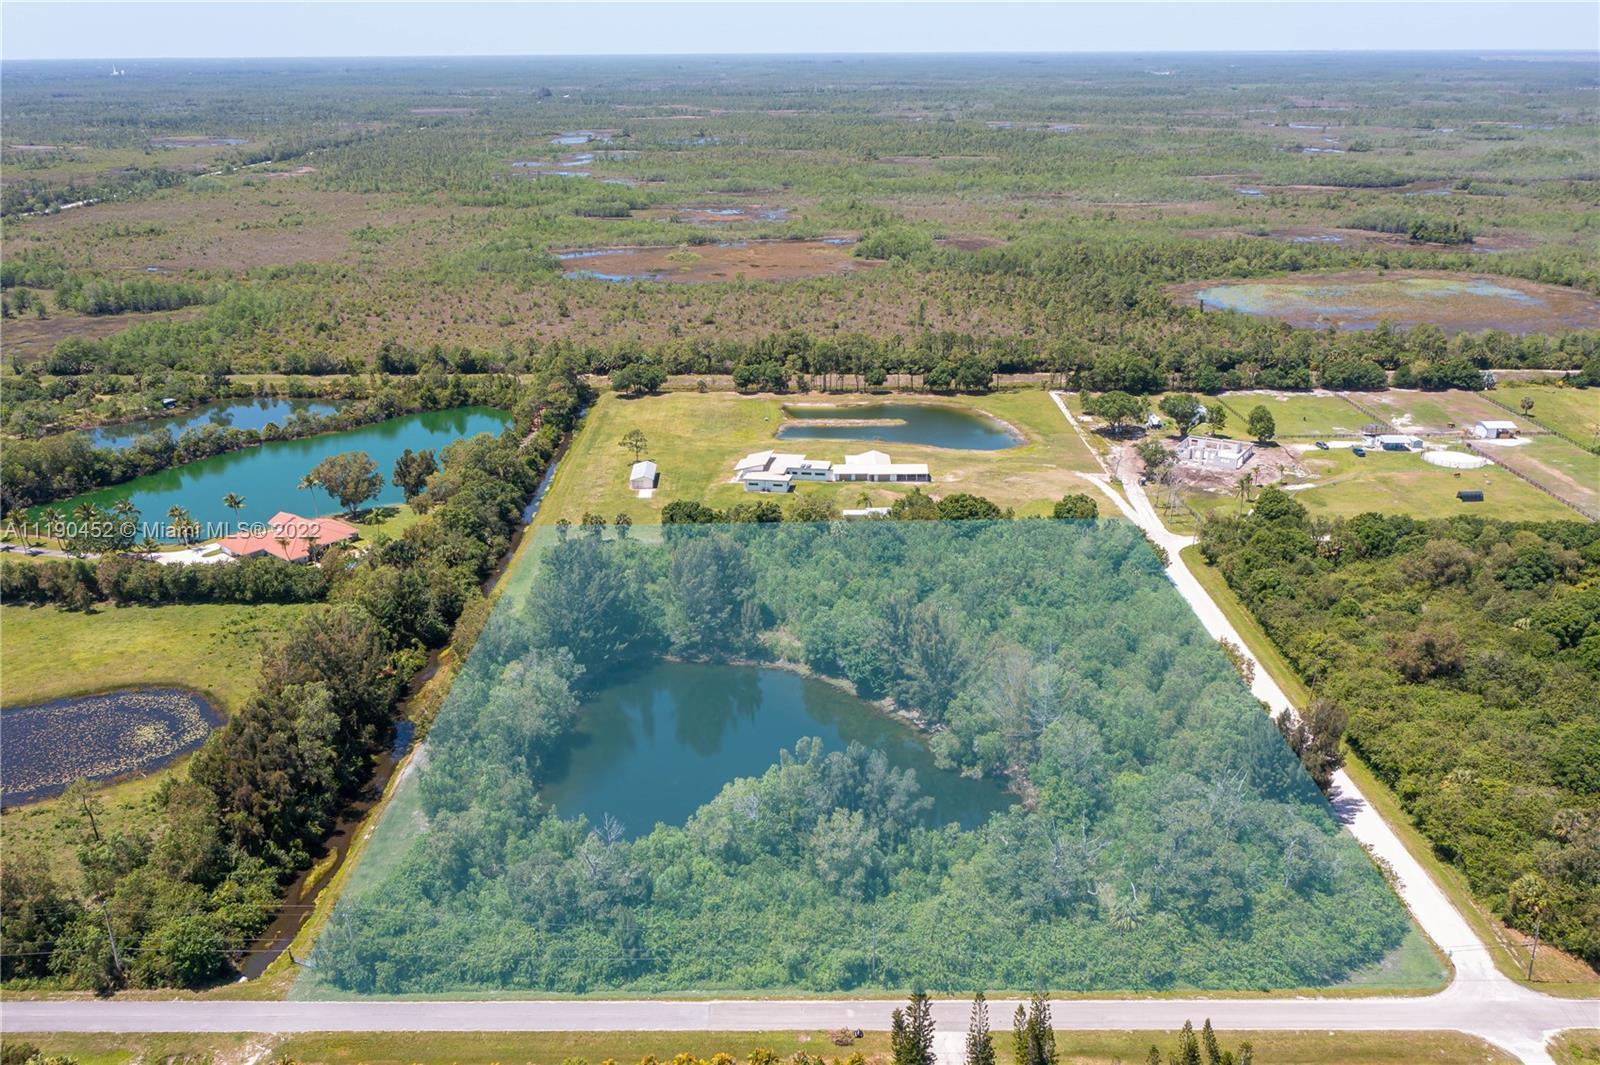 LARGE LAND LOT AVAILABLE IN HIGHLY SOUGHT AFTER, JUPITER FARMS! This 7.06 acre lot is heavily wooded